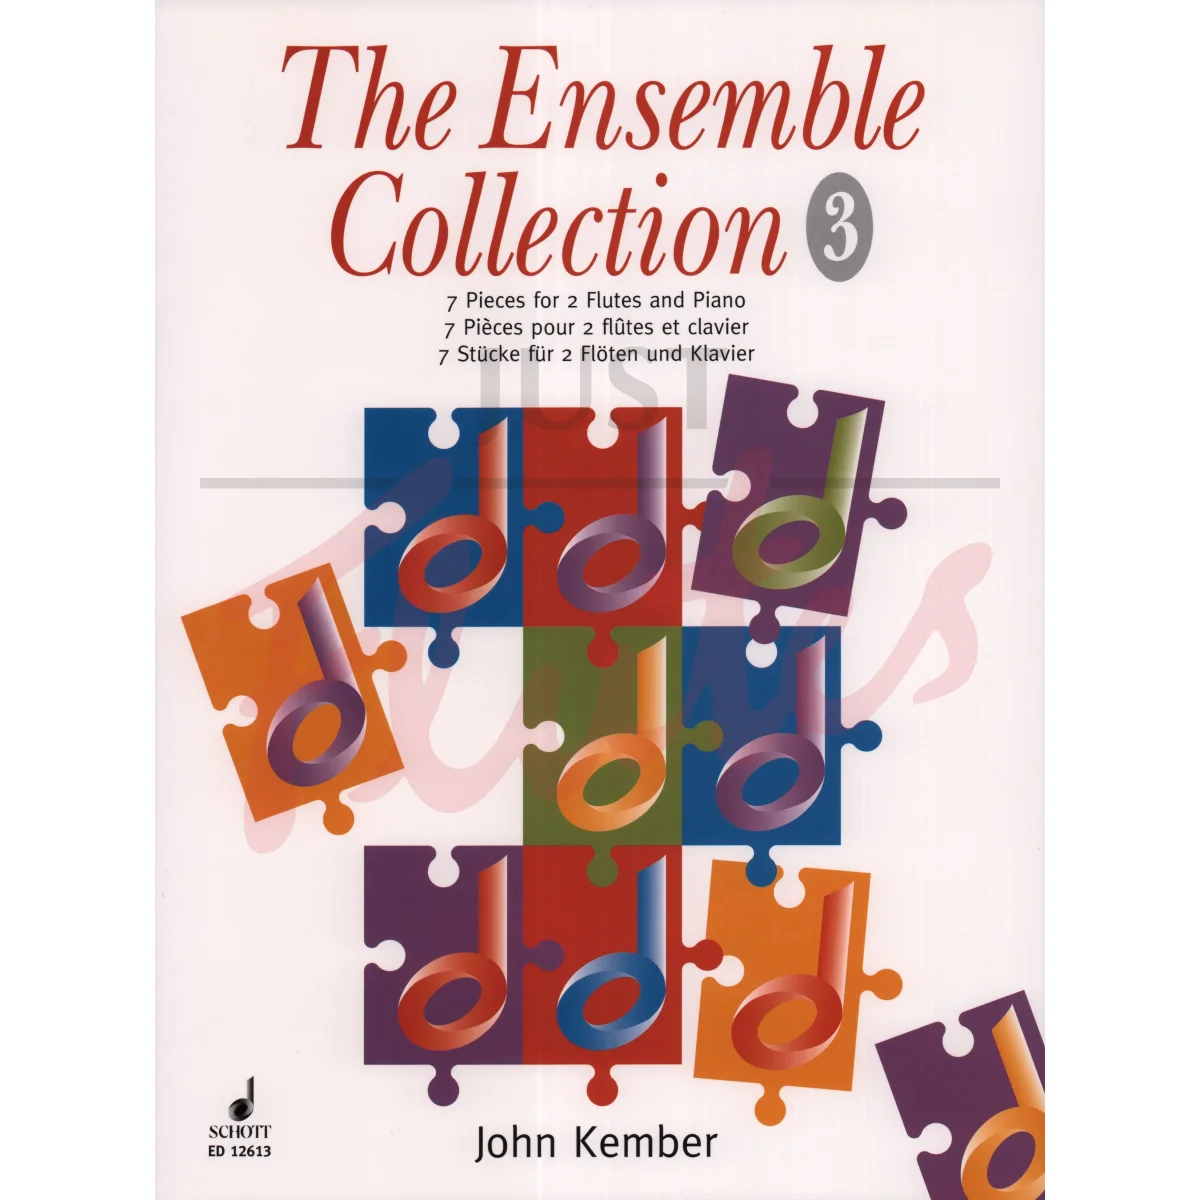 The Ensemble Collection Vol. 3: 7 Pieces for Two Flutes and Piano